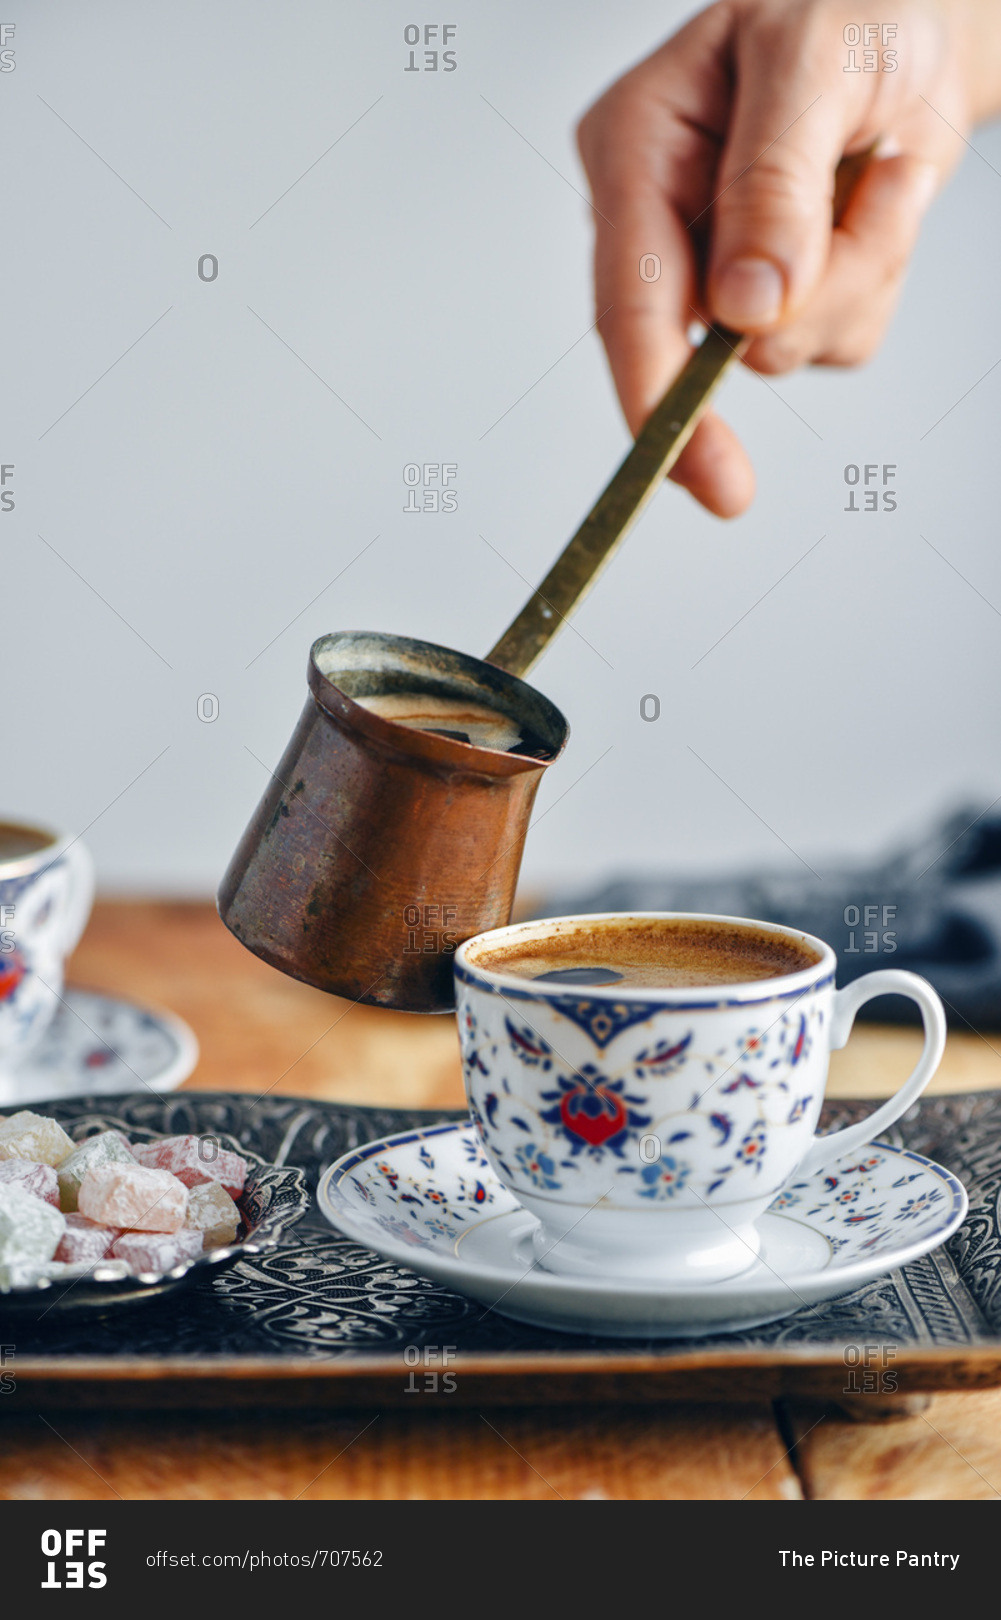 A woman pouring Turkish coffee into a Turkish coffee cup from a copper Turkish coffee pot